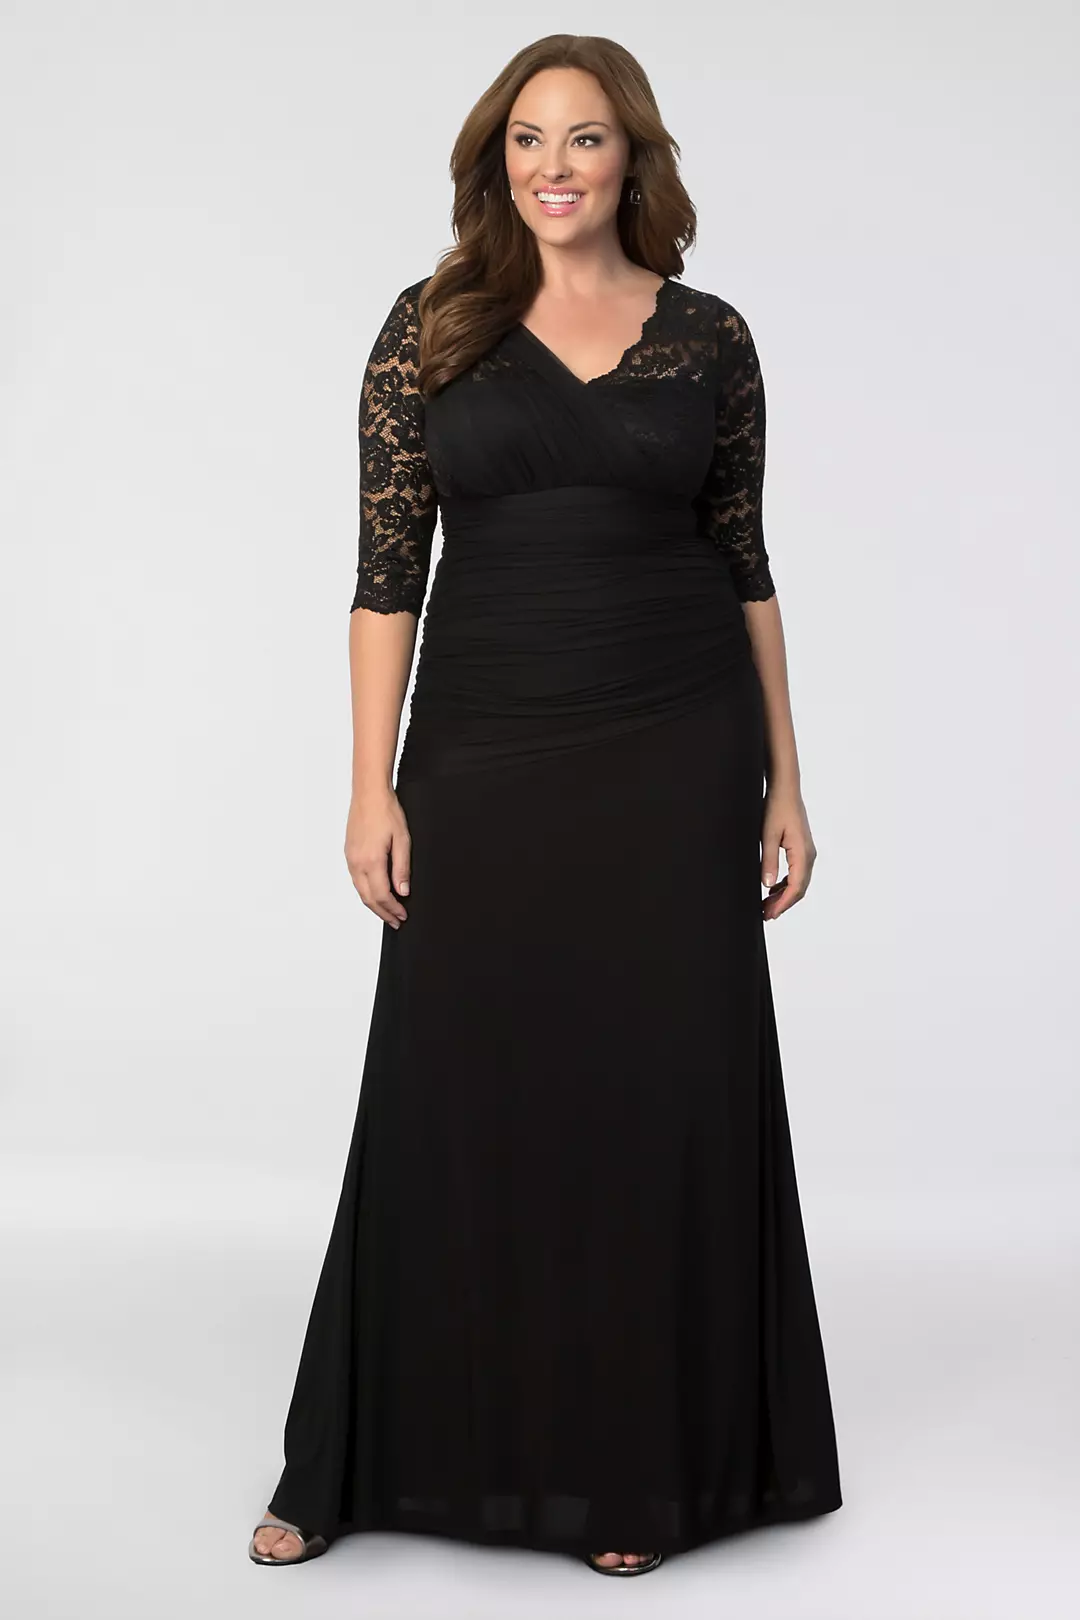 Soiree Plus Size Evening Gown Image